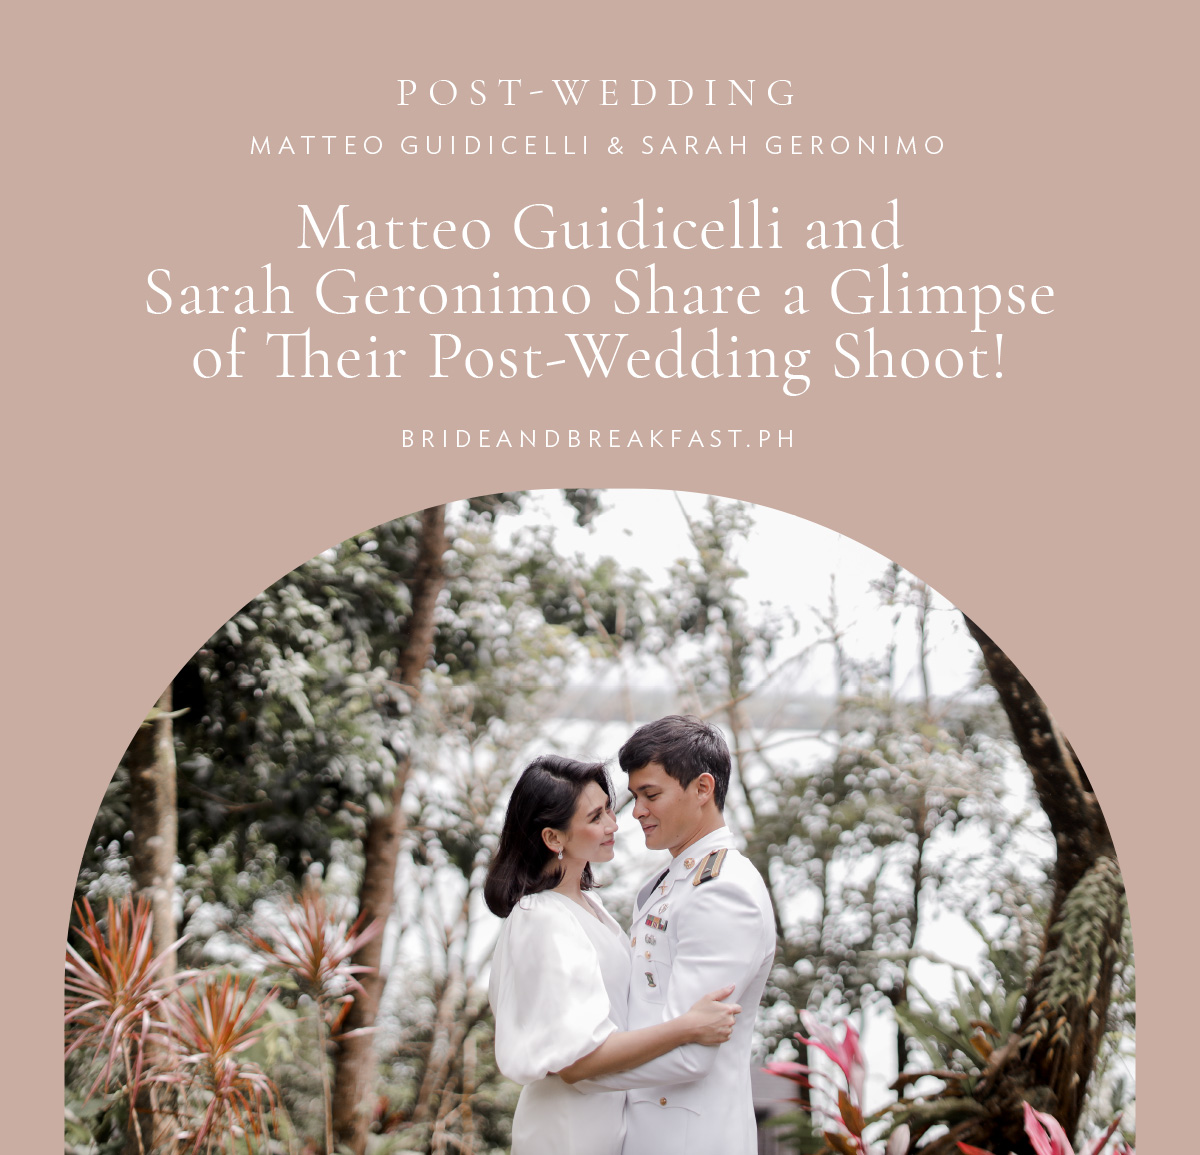 Matteo Guidicelli and Sarah Geronimo Share a Glimpse of Their Post-Wedding Shoot!